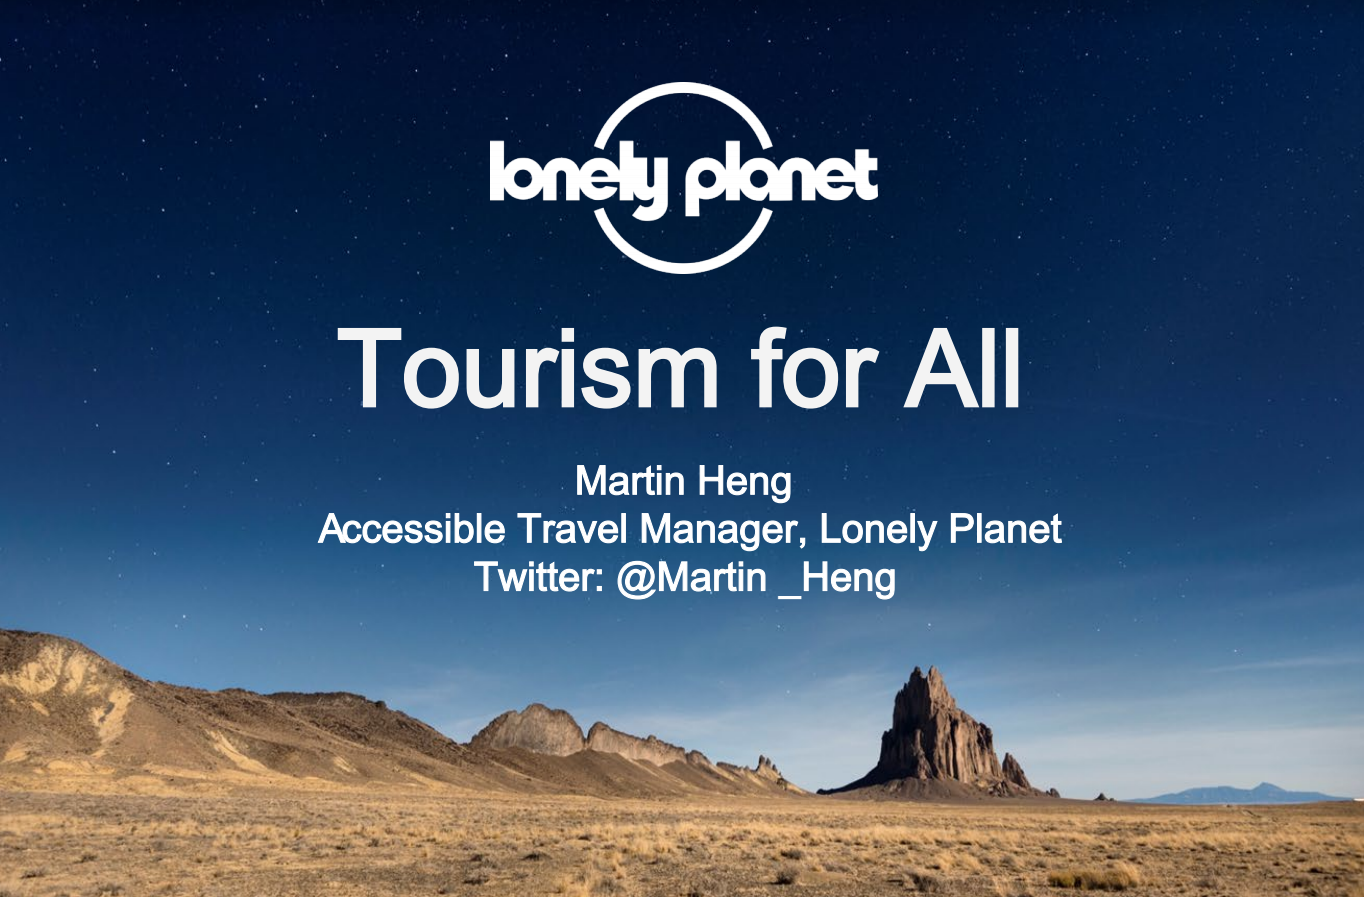 Making Tourism Accessible for All - Martin Heng